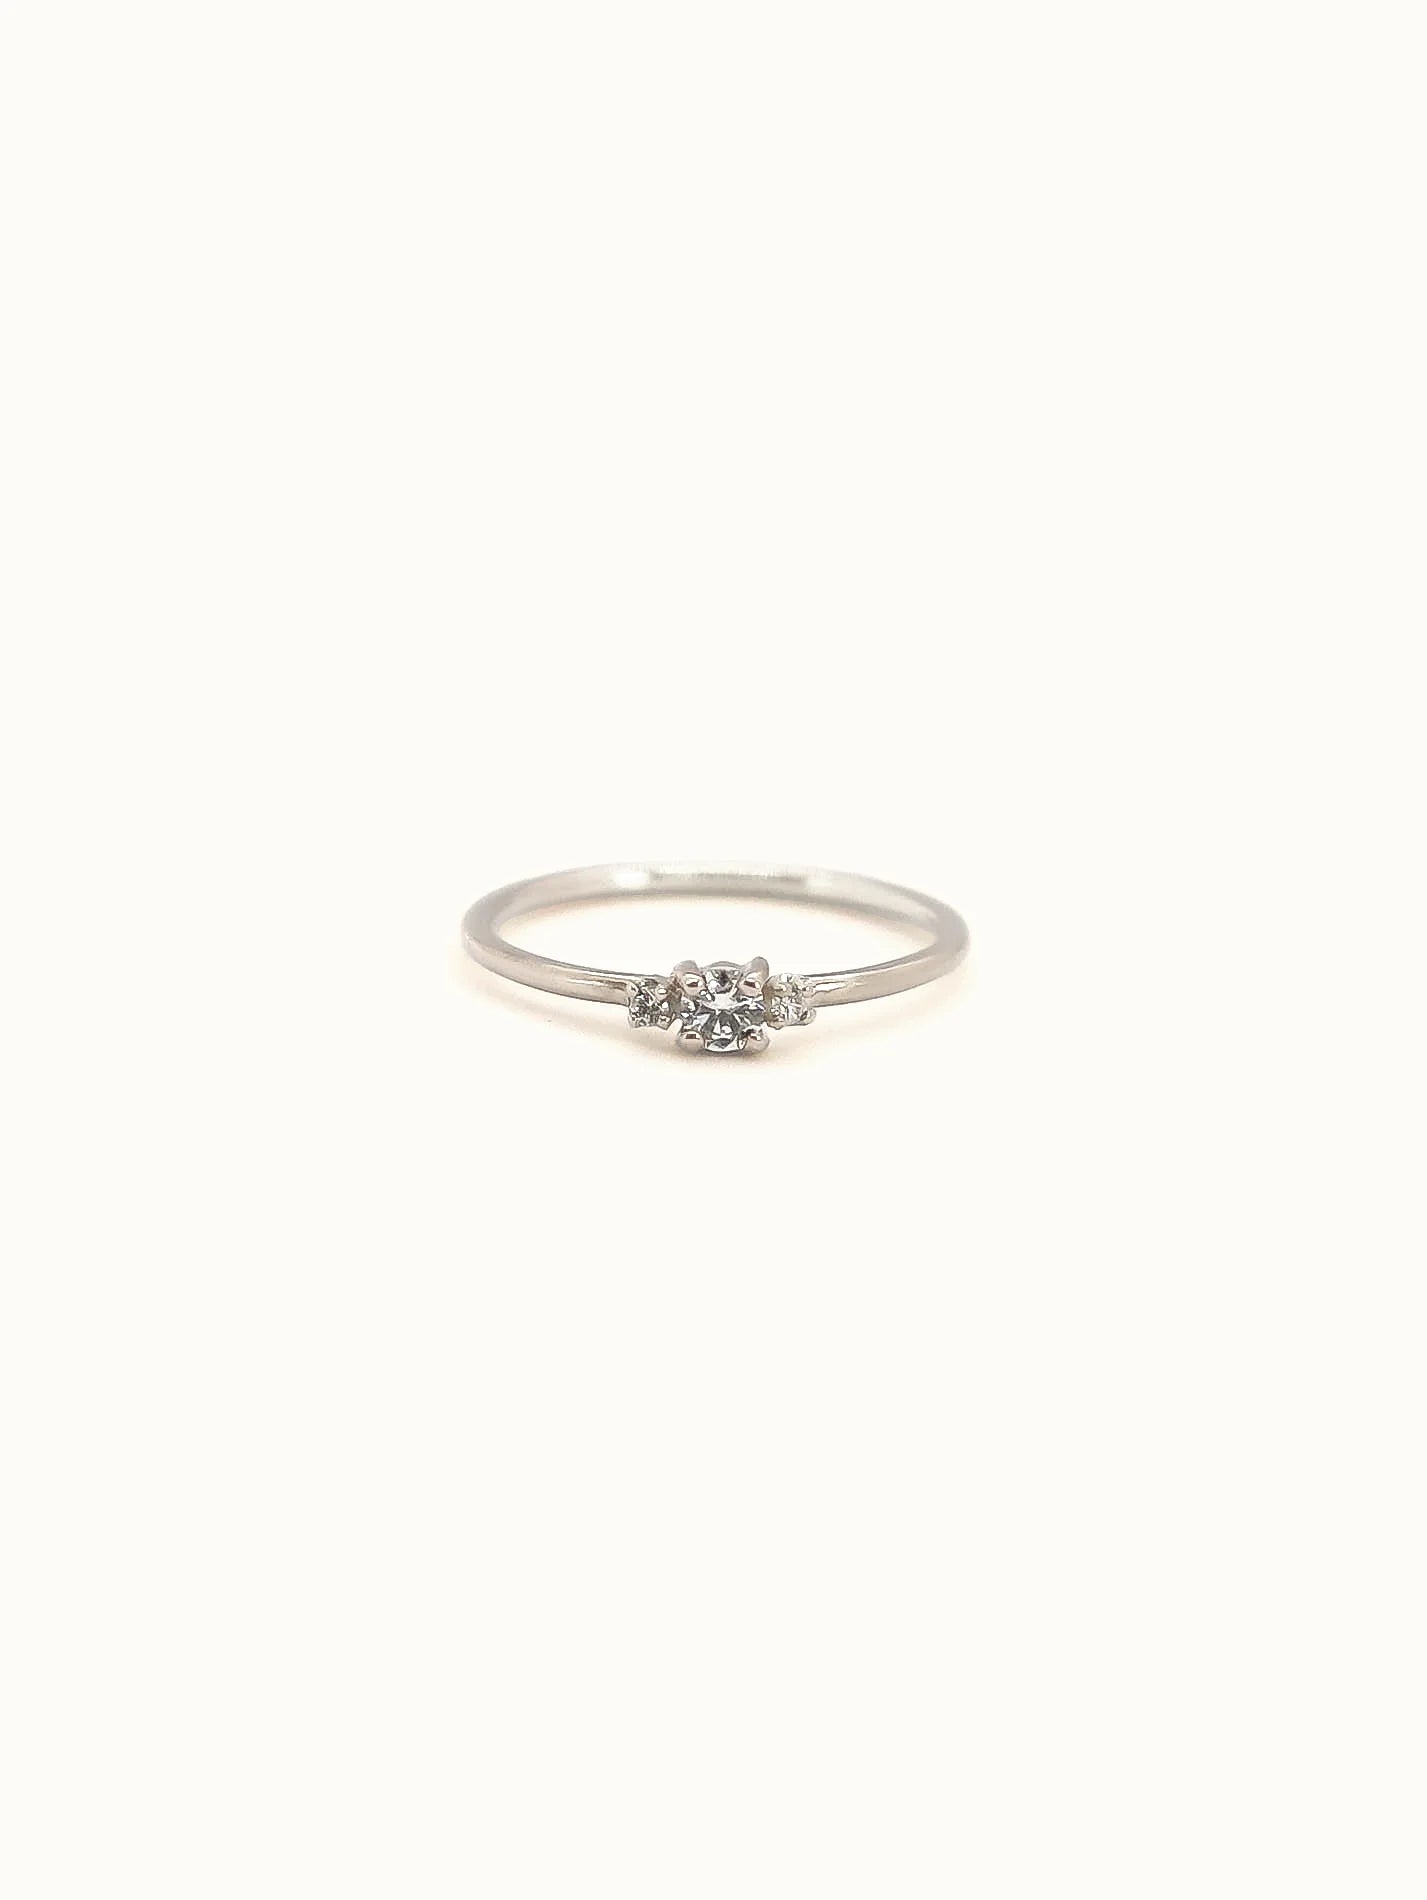 Delicate Diamond Ring Set, Triangle Diamond Ring With Diamond Eternity  Band, Delicate Engagement Ring - Etsy | Wedding rings, Cute jewelry, Jewelry